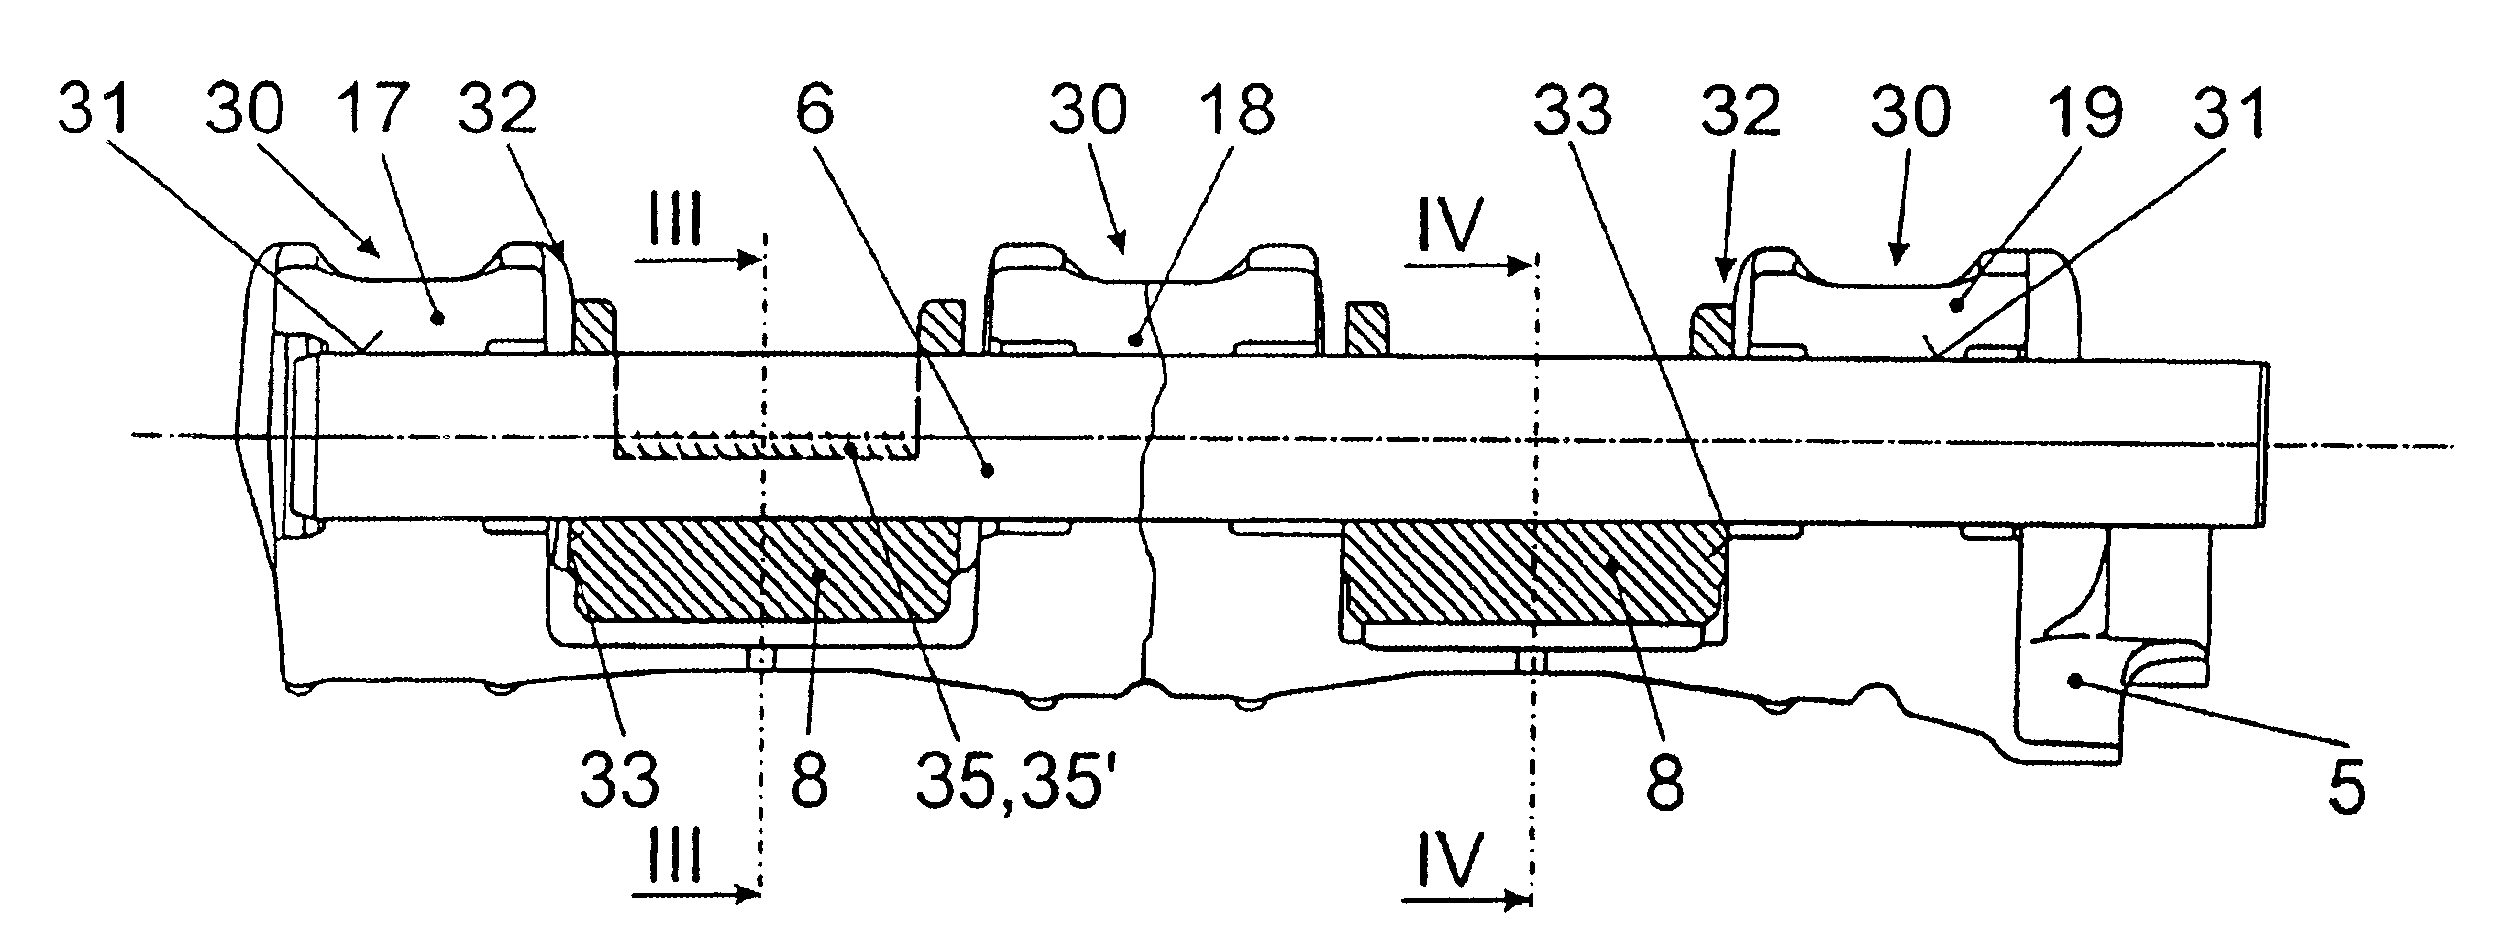 Compensating shaft assembly for piston engines